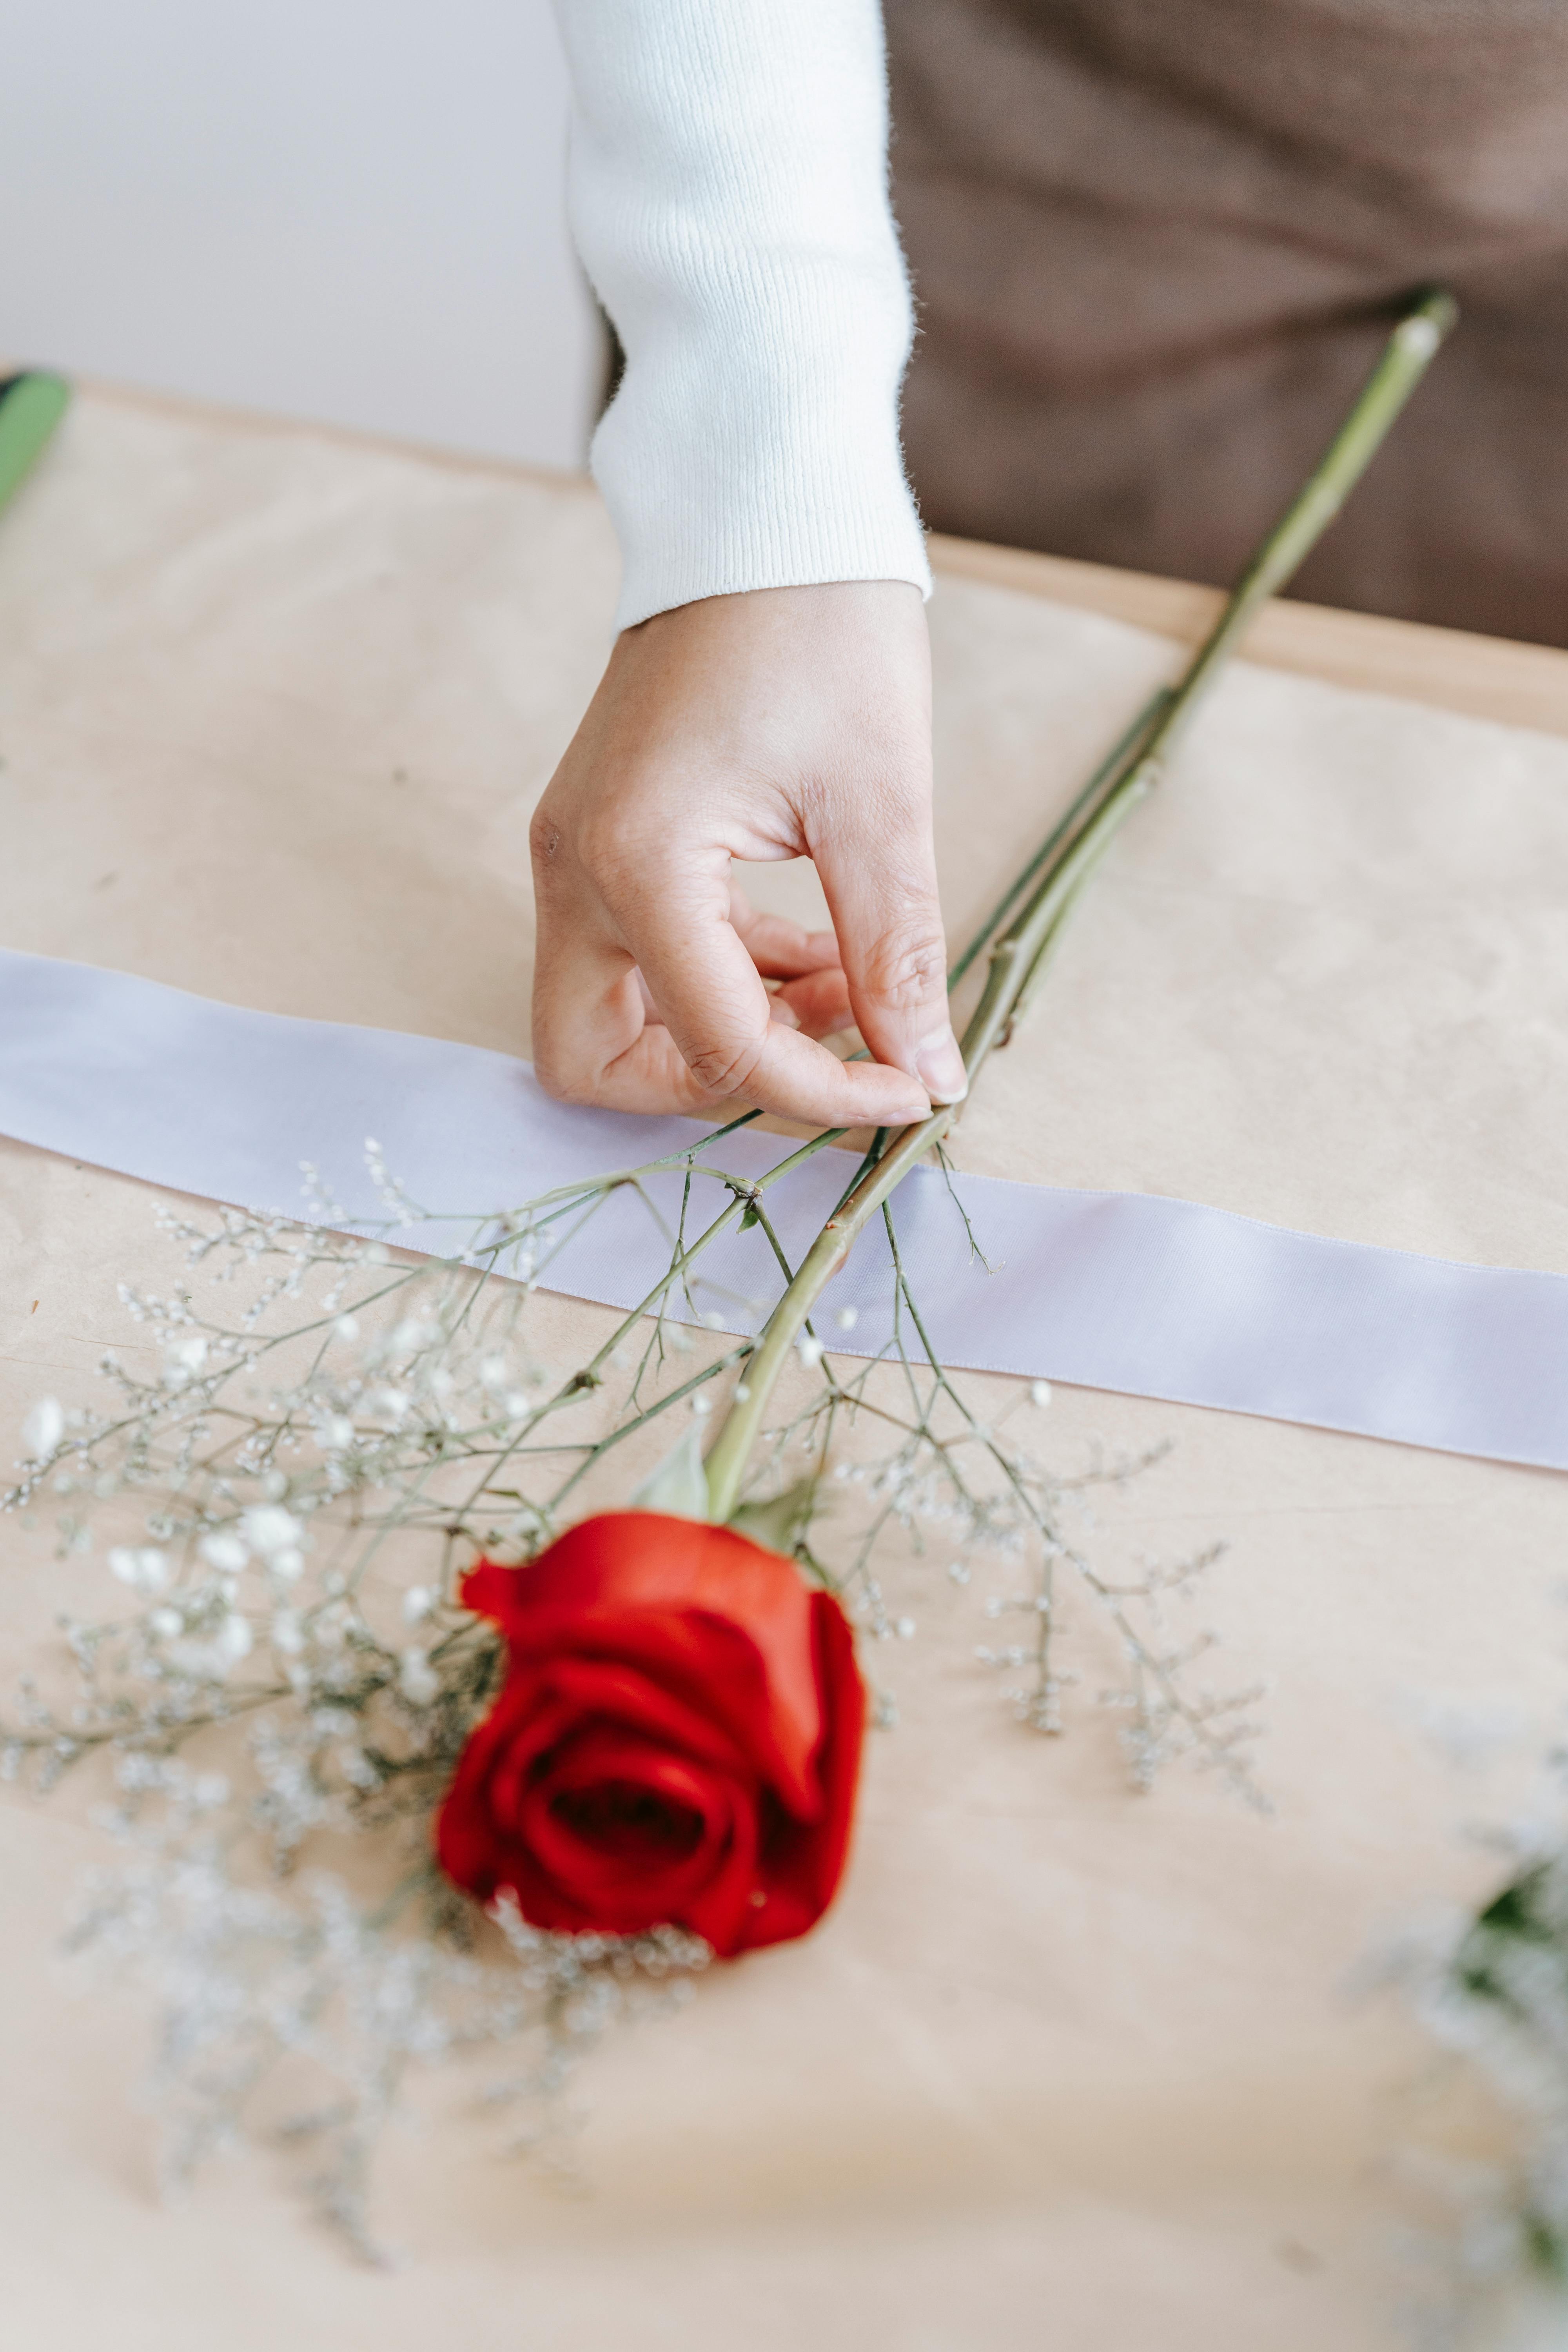 A rose on top of a wrapped gift | Source: Pexels